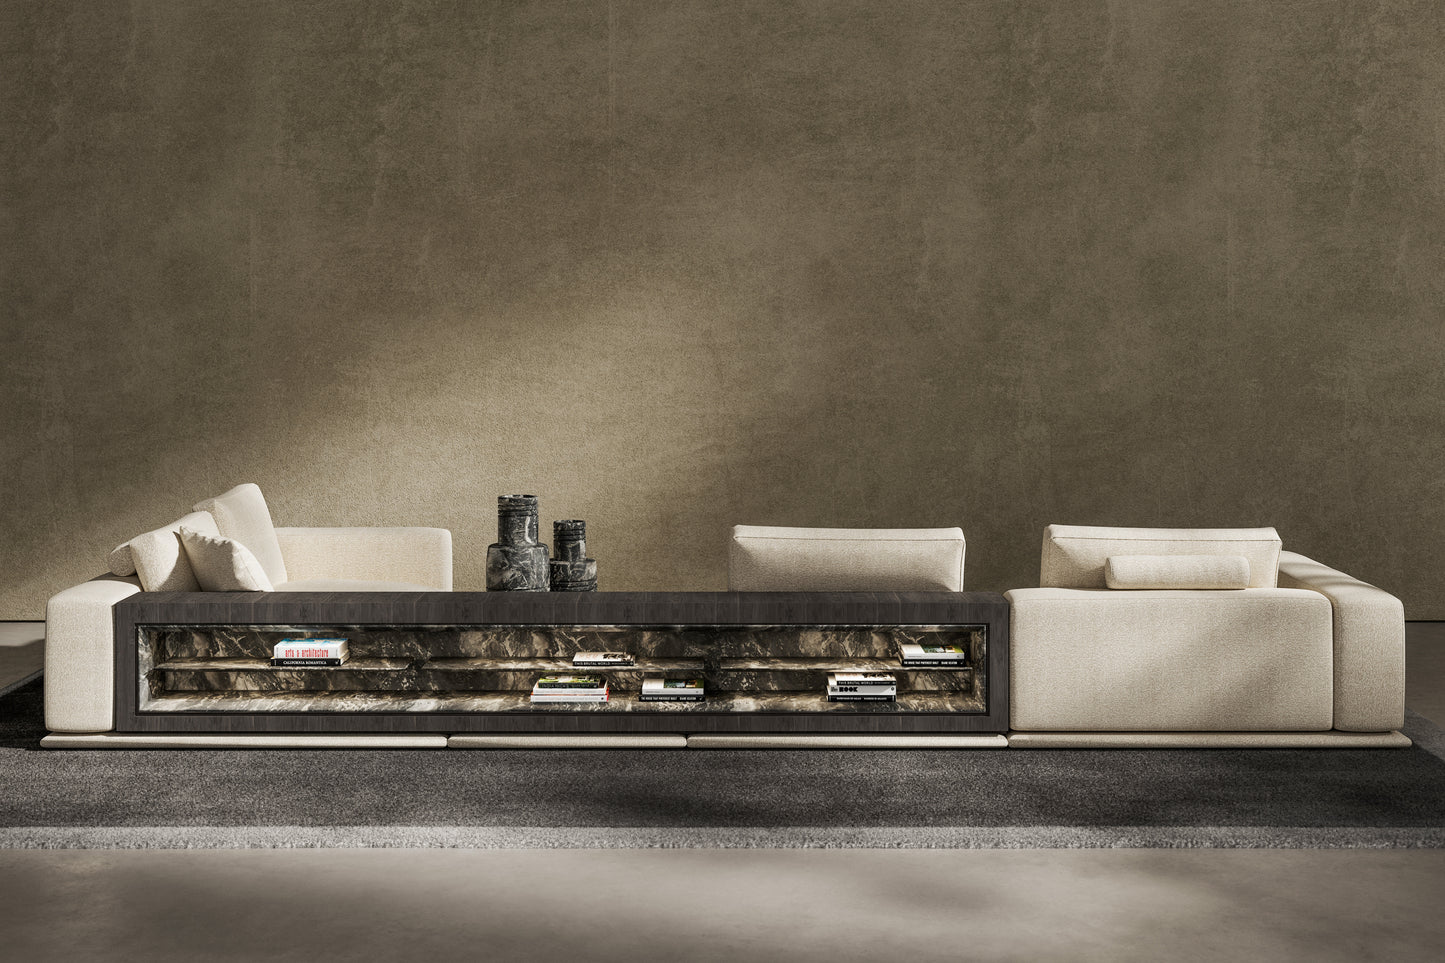 ISOLA SOFA | COLLECTION PIETRA CASA | QUOTE BY REQUEST